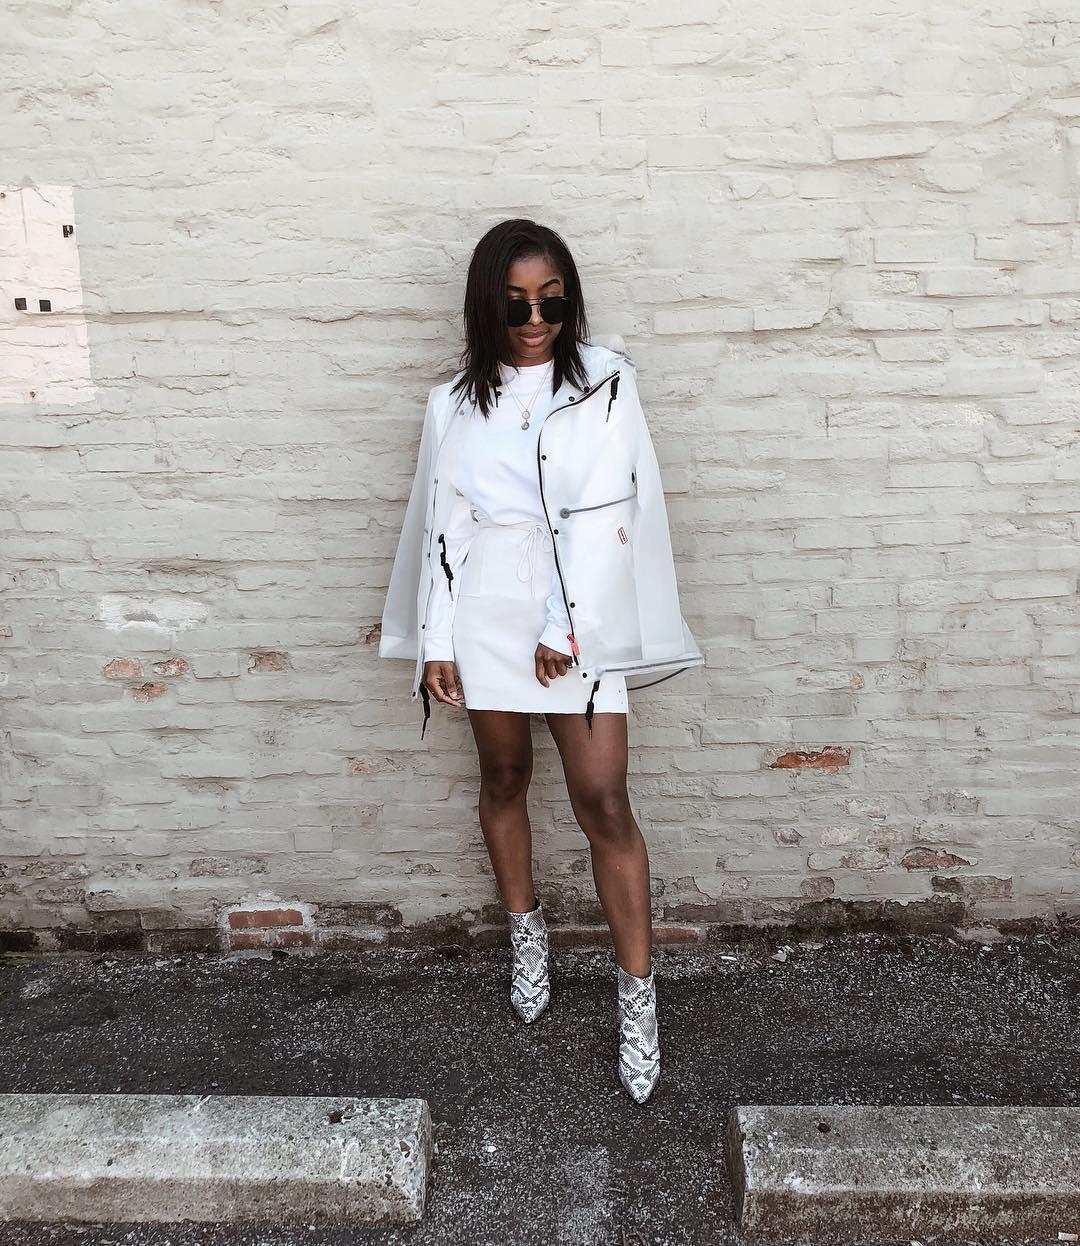 BN Style: African Fashion Bloggers Based In The US You Should ...